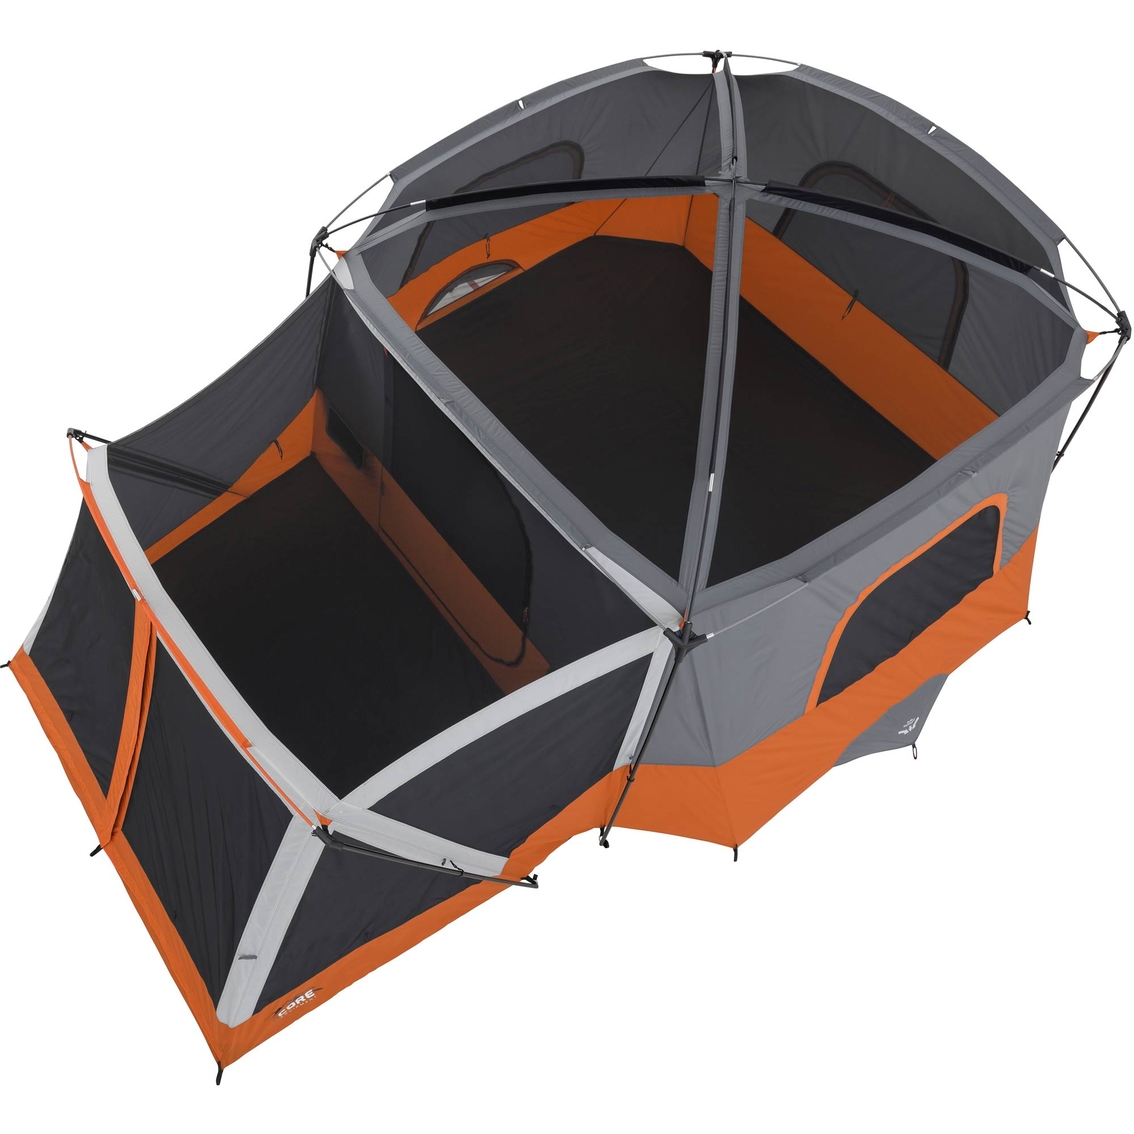 Core Equipment 11 Person Cabin Tent with Screen Room - Image 5 of 10